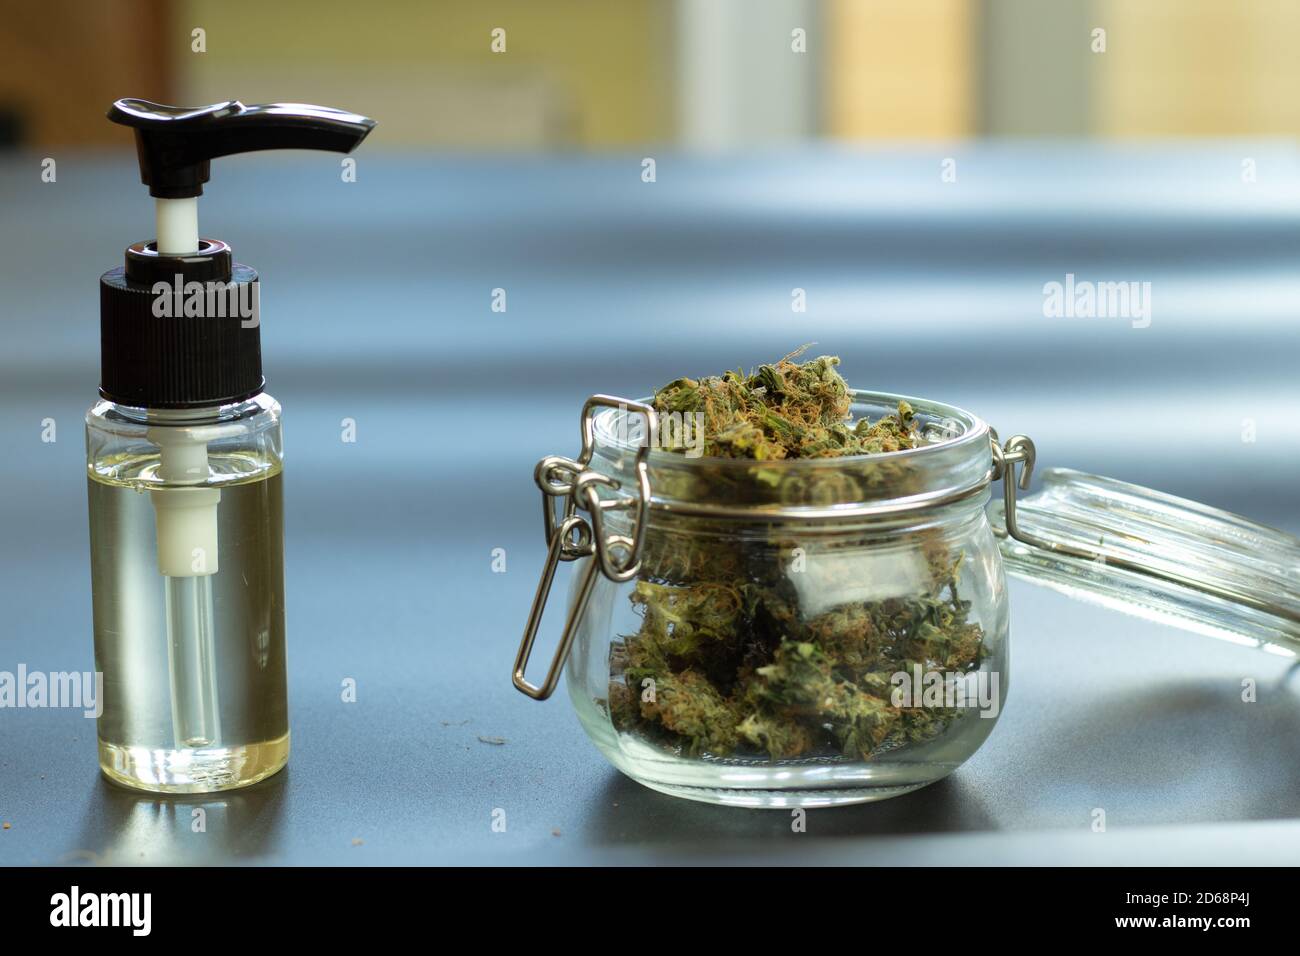 CBD cannabidiol oil bottle and cannabis buds in jar on blurry background with copy space. Marijuana retail business shop illustration Stock Photo